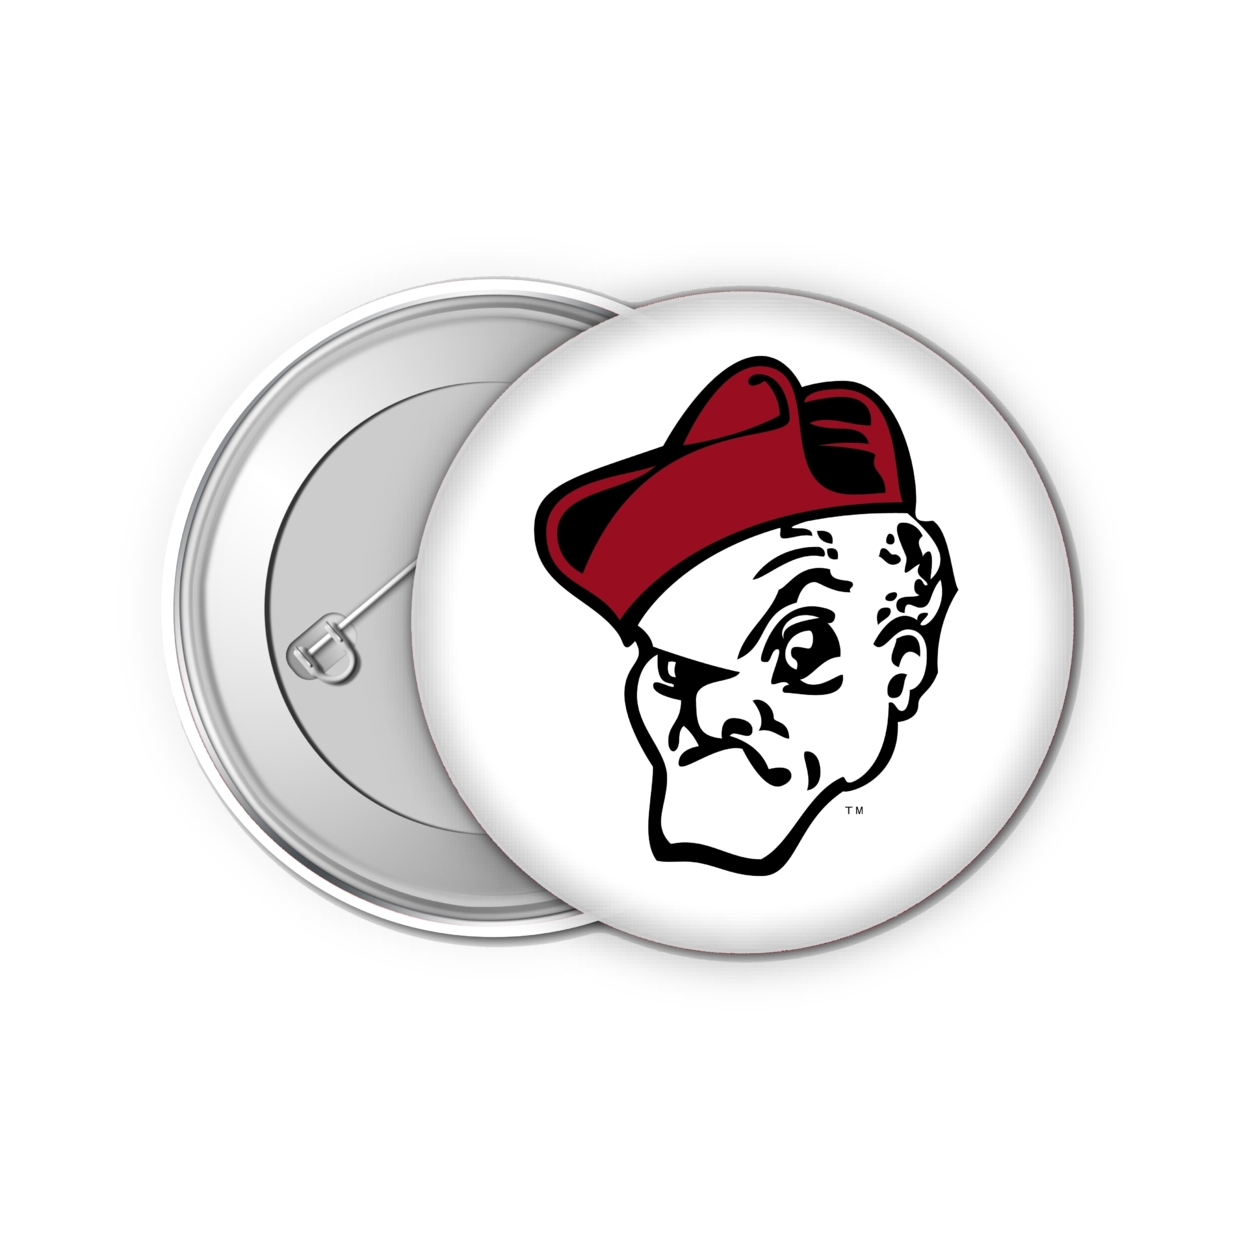 Ohio Wesleyan University Small 1-Inch Button Pin 4 Pack